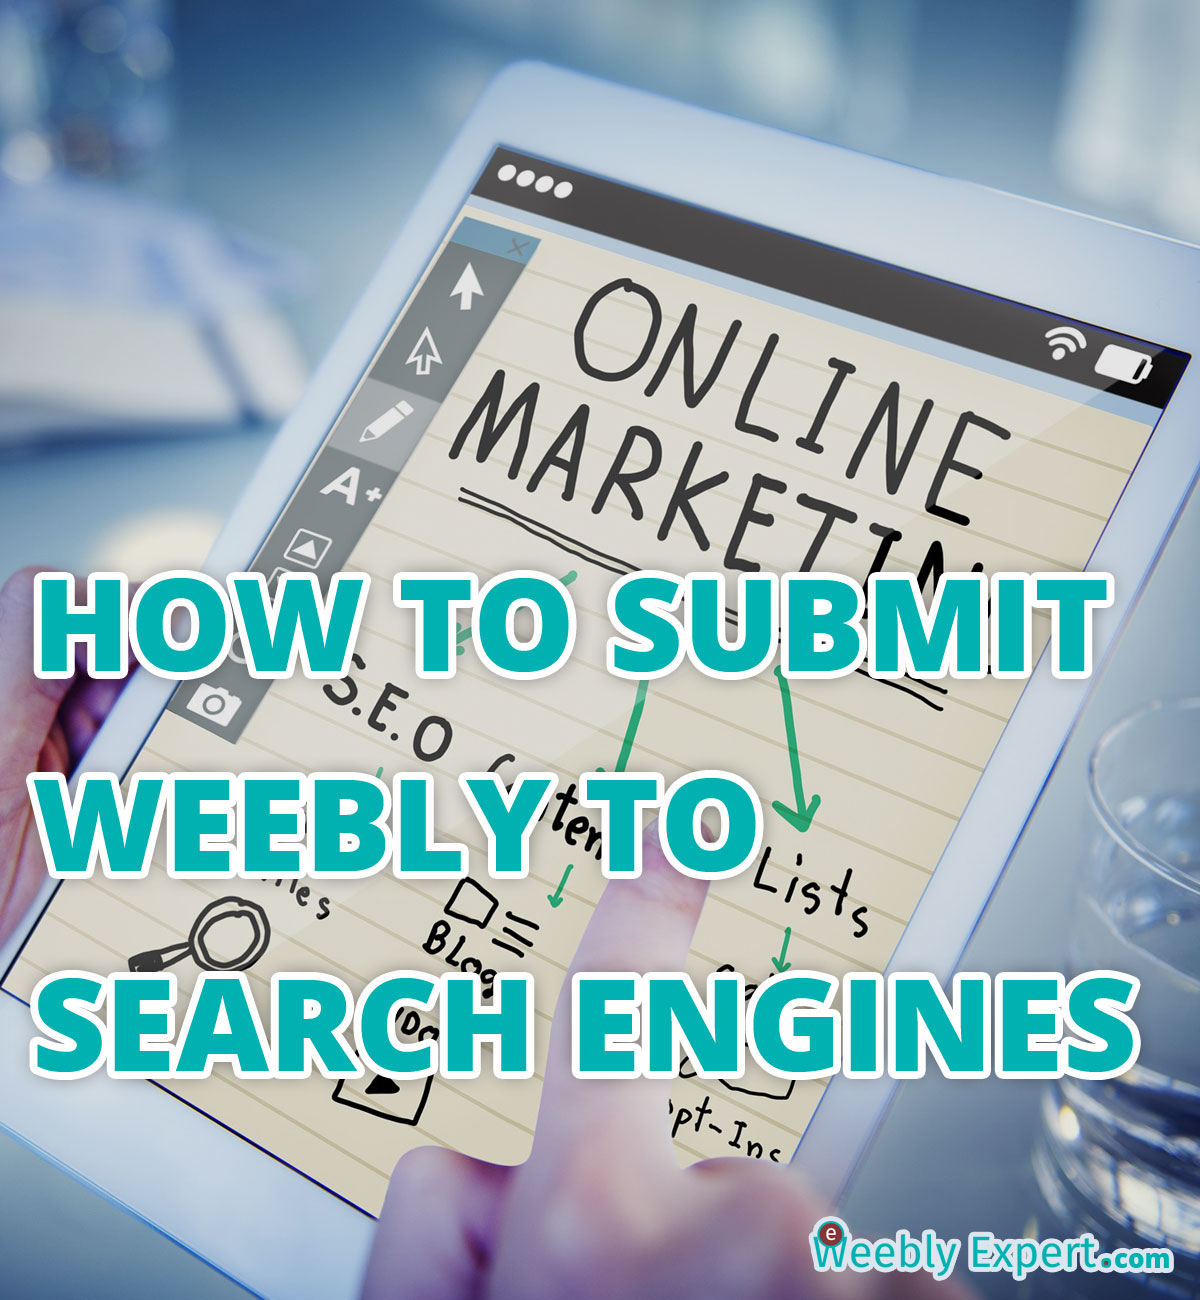 SUBMIT WEEBLY WEBSITE TO SEARCH ENGINES